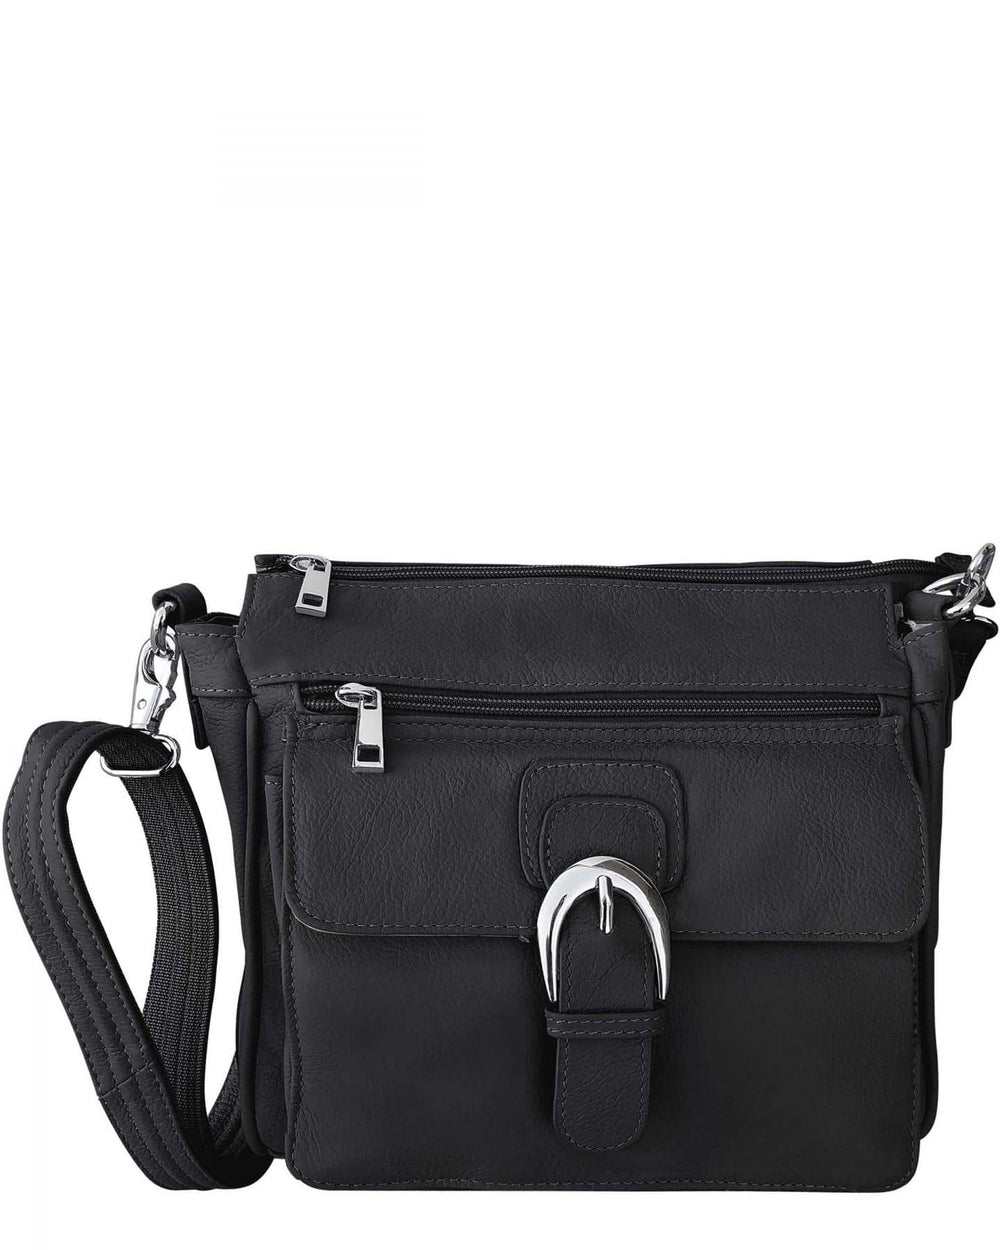 Buckle Front Leather Concealment Crossbody Bag